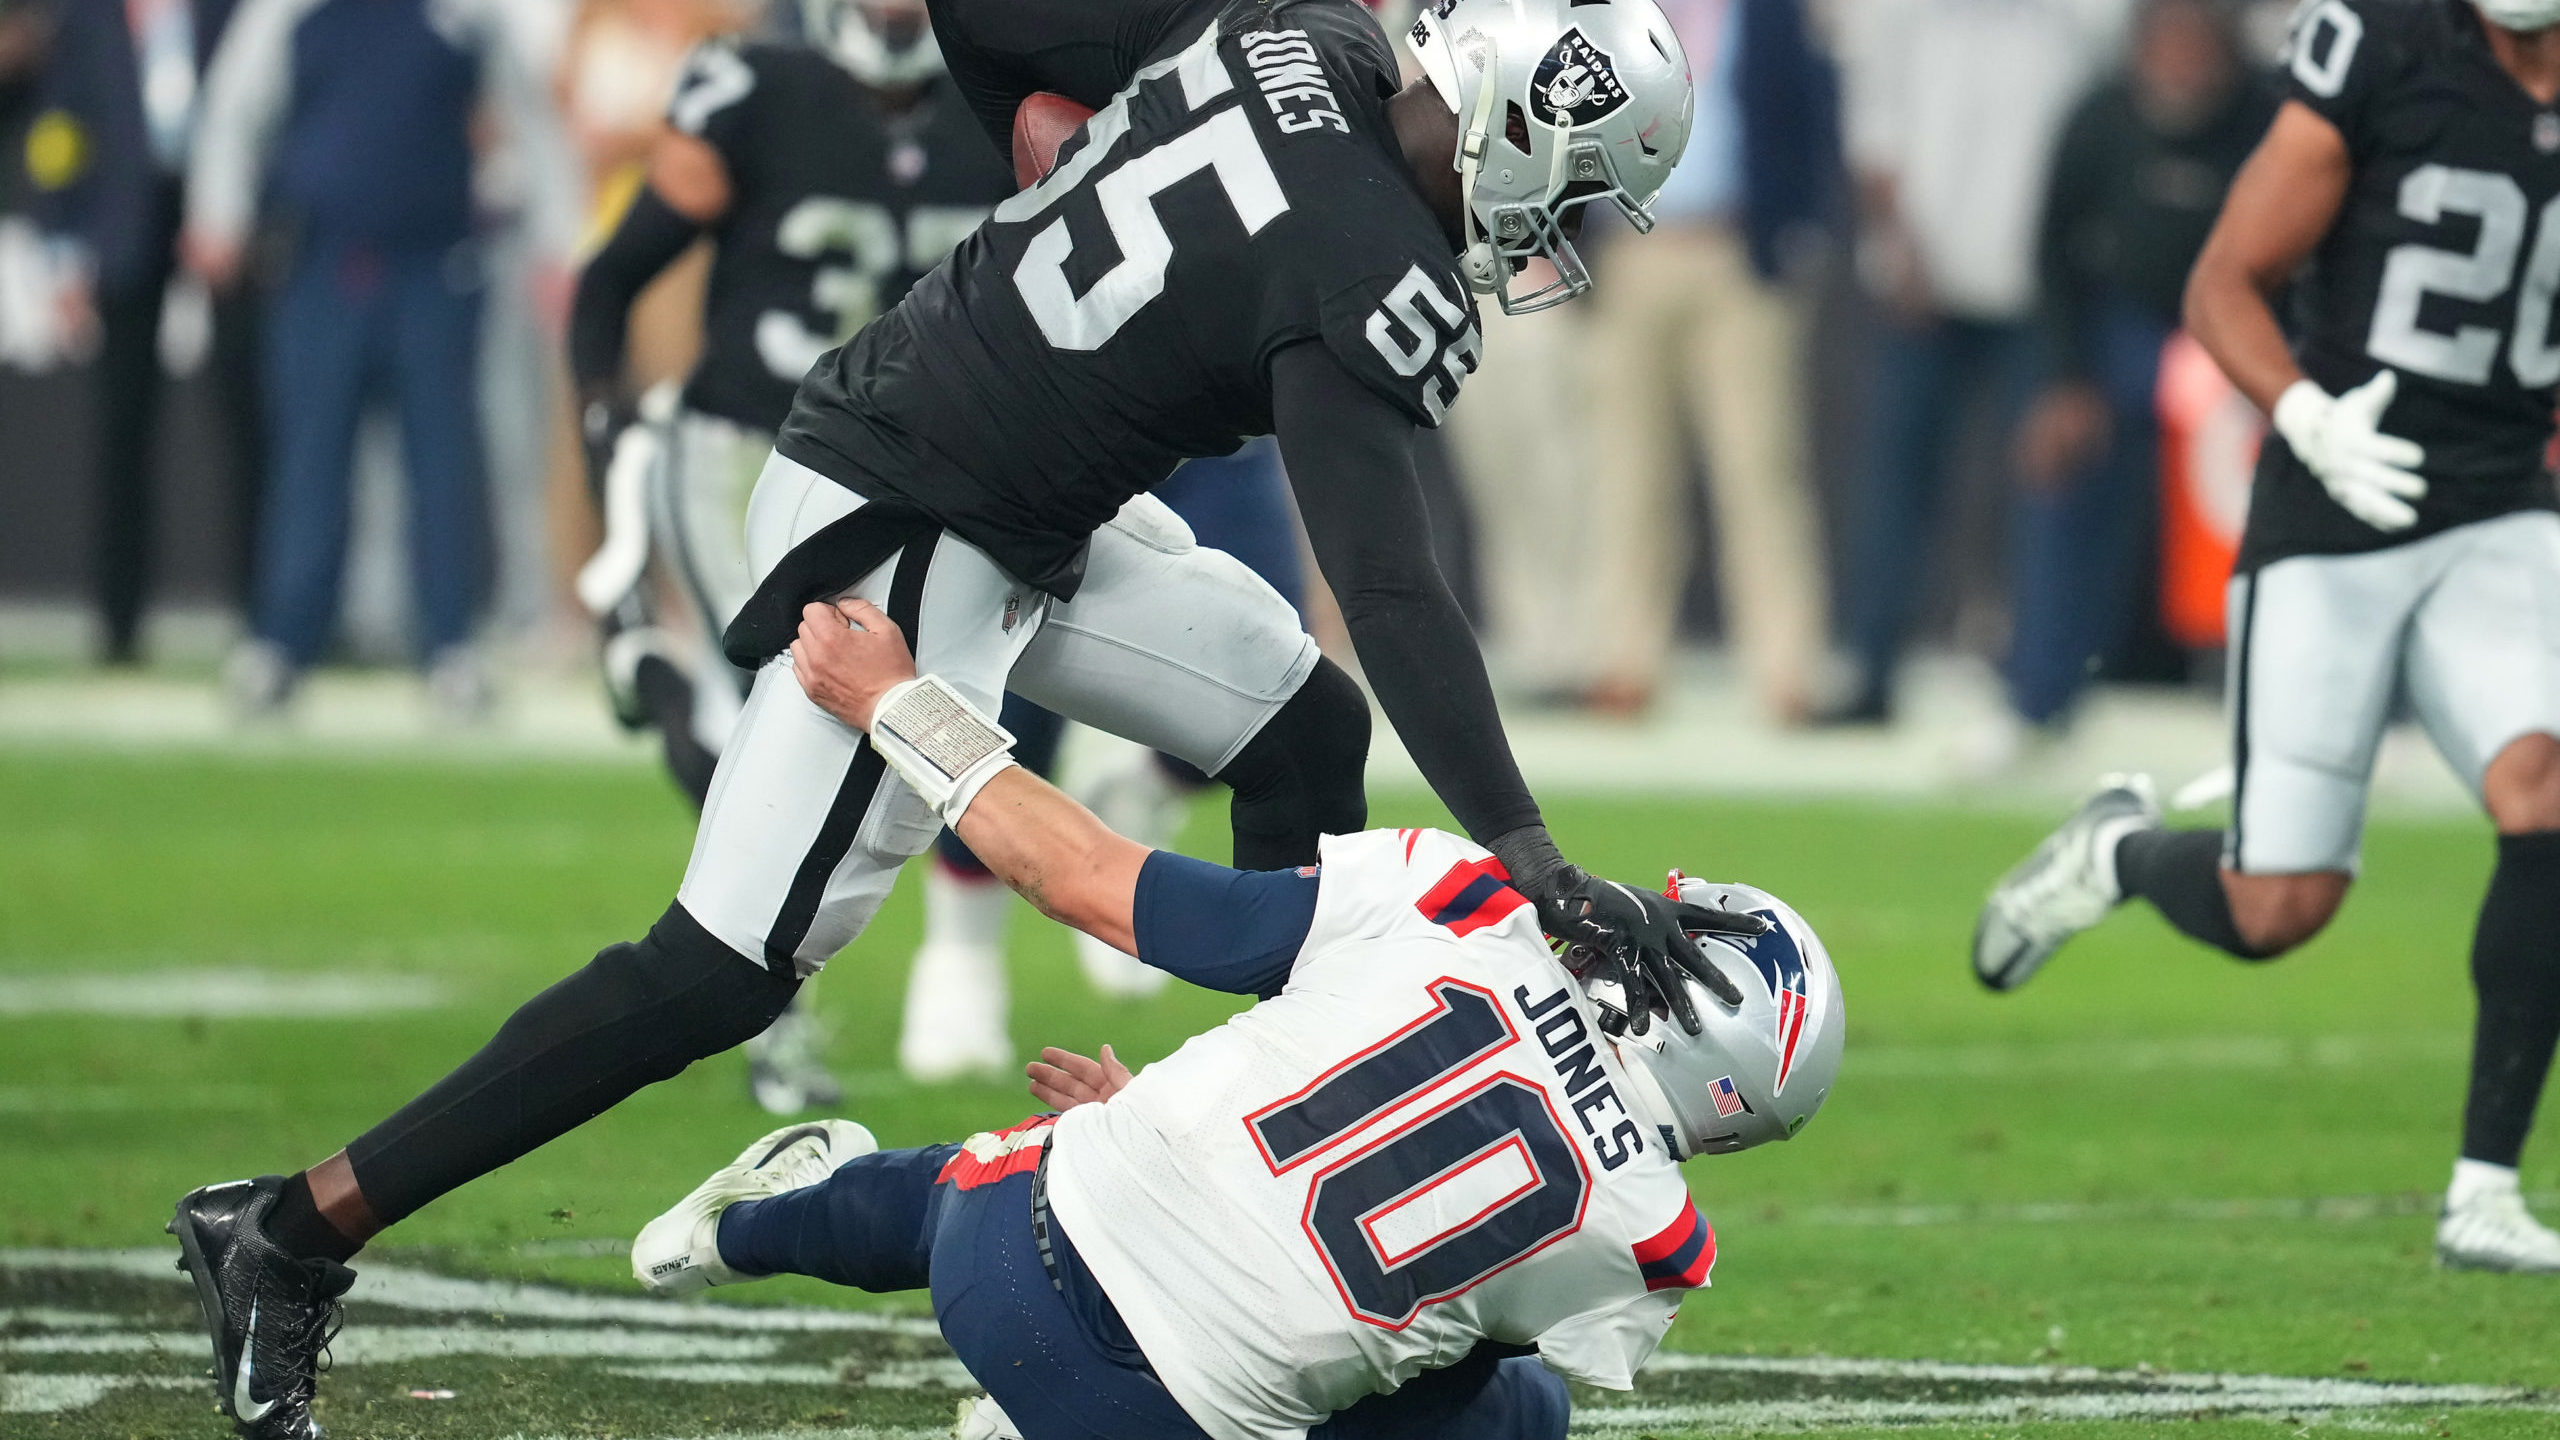 Lateral Damage: Patriots’ Playoff Chances Take Hit After Loss on Bizzare Final Play